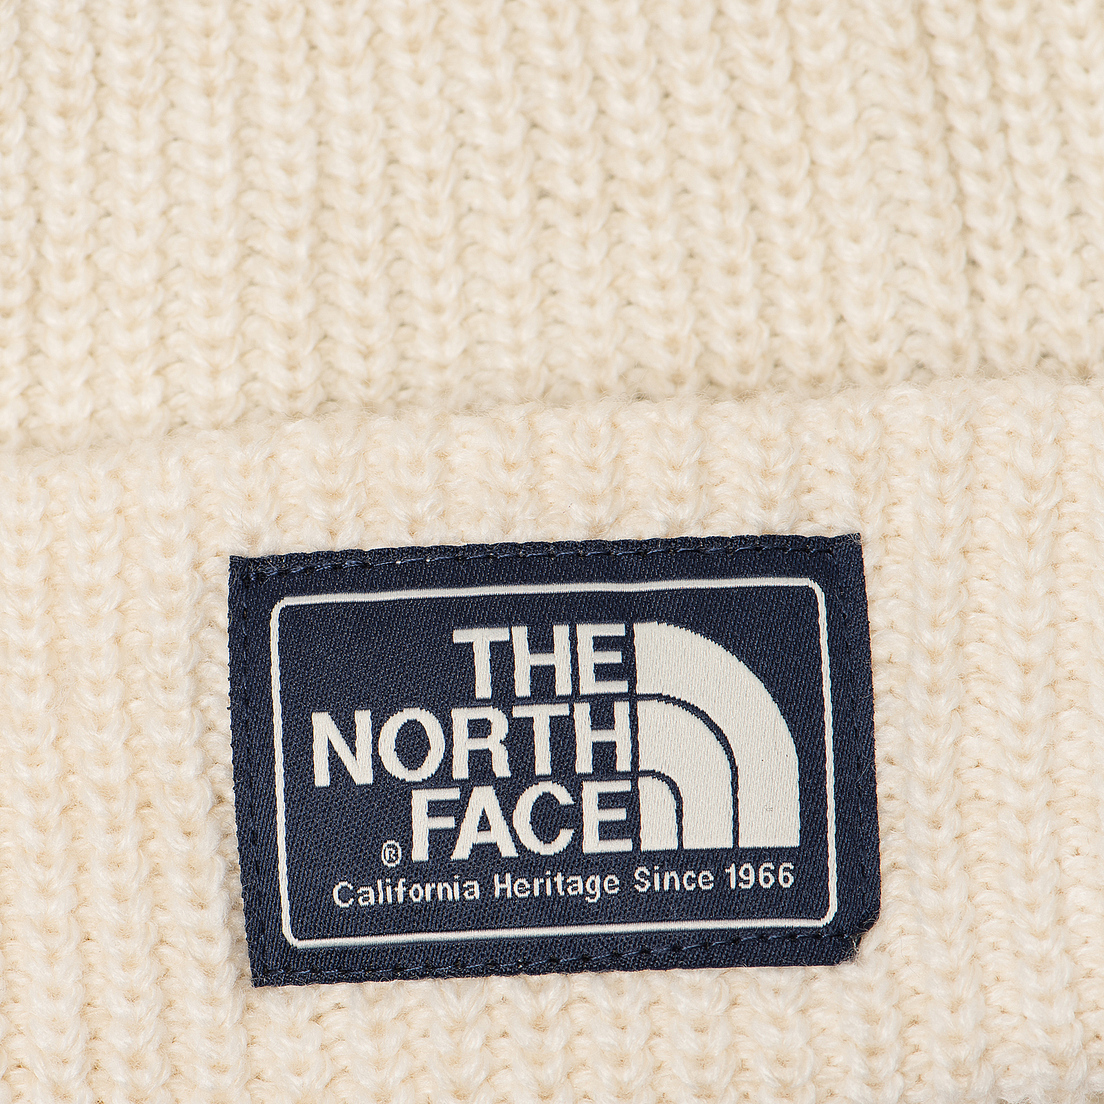 The North Face Шапка Salty Dog Beanie